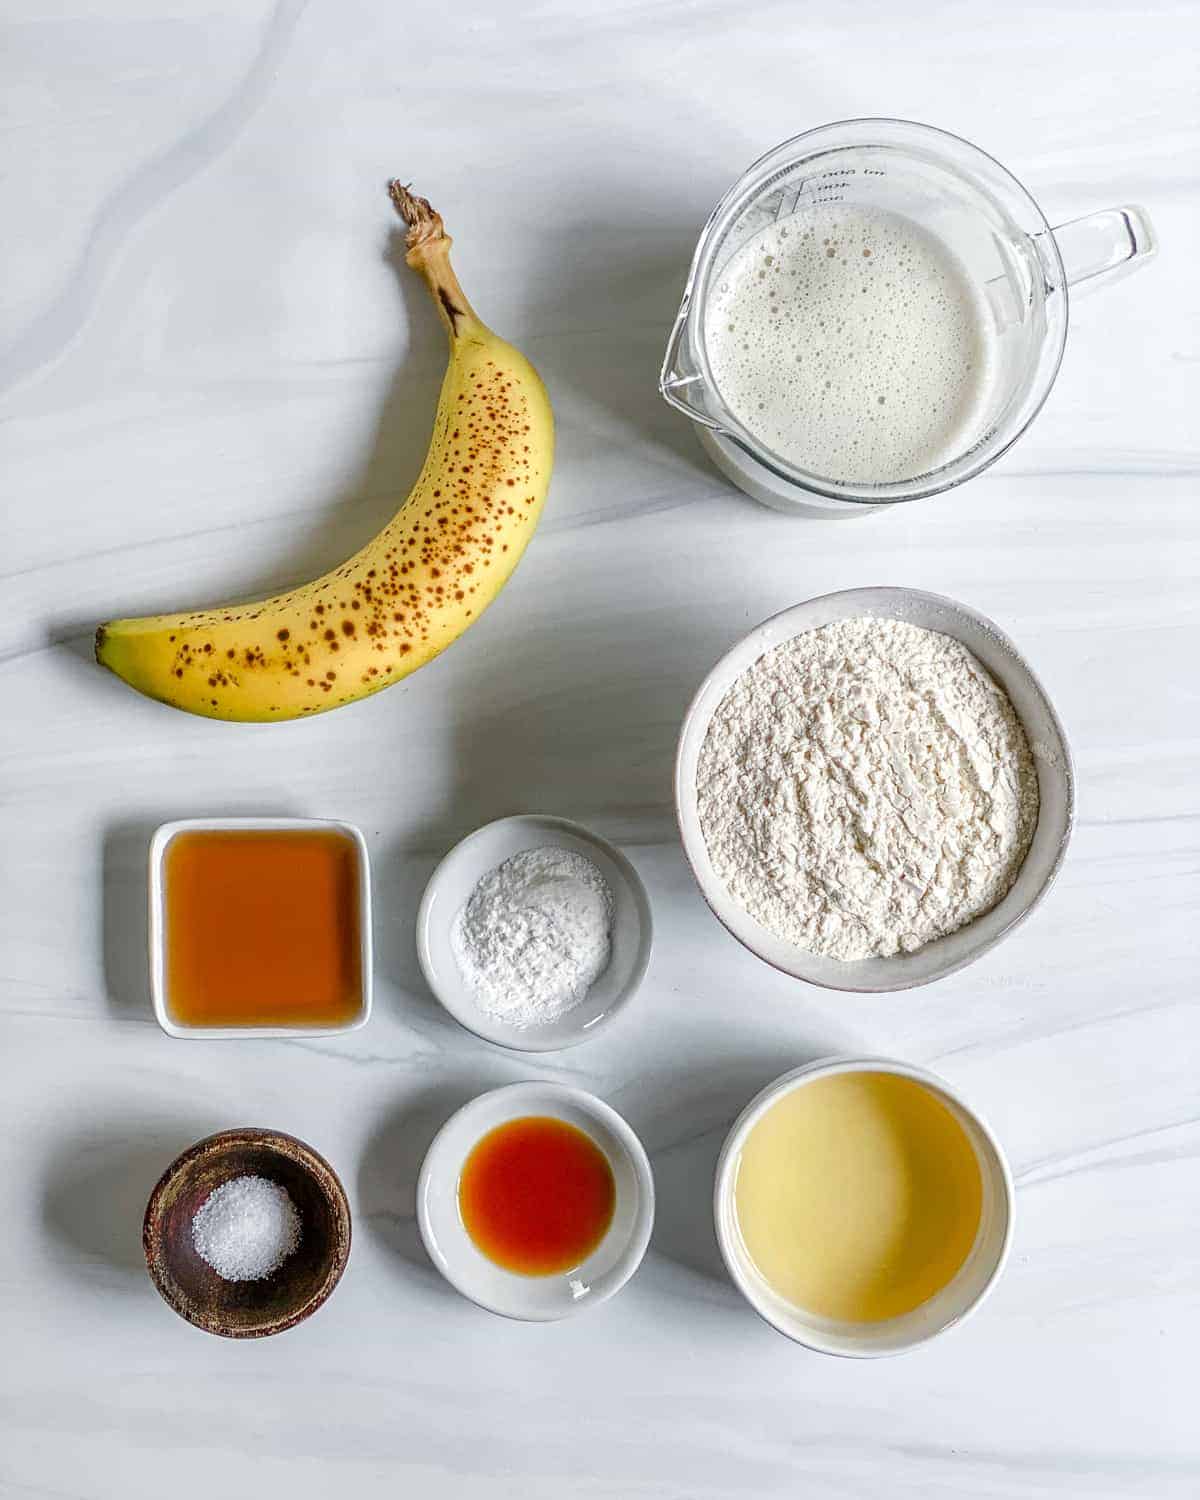 ingredients of banana pancakes spread out against a white surface